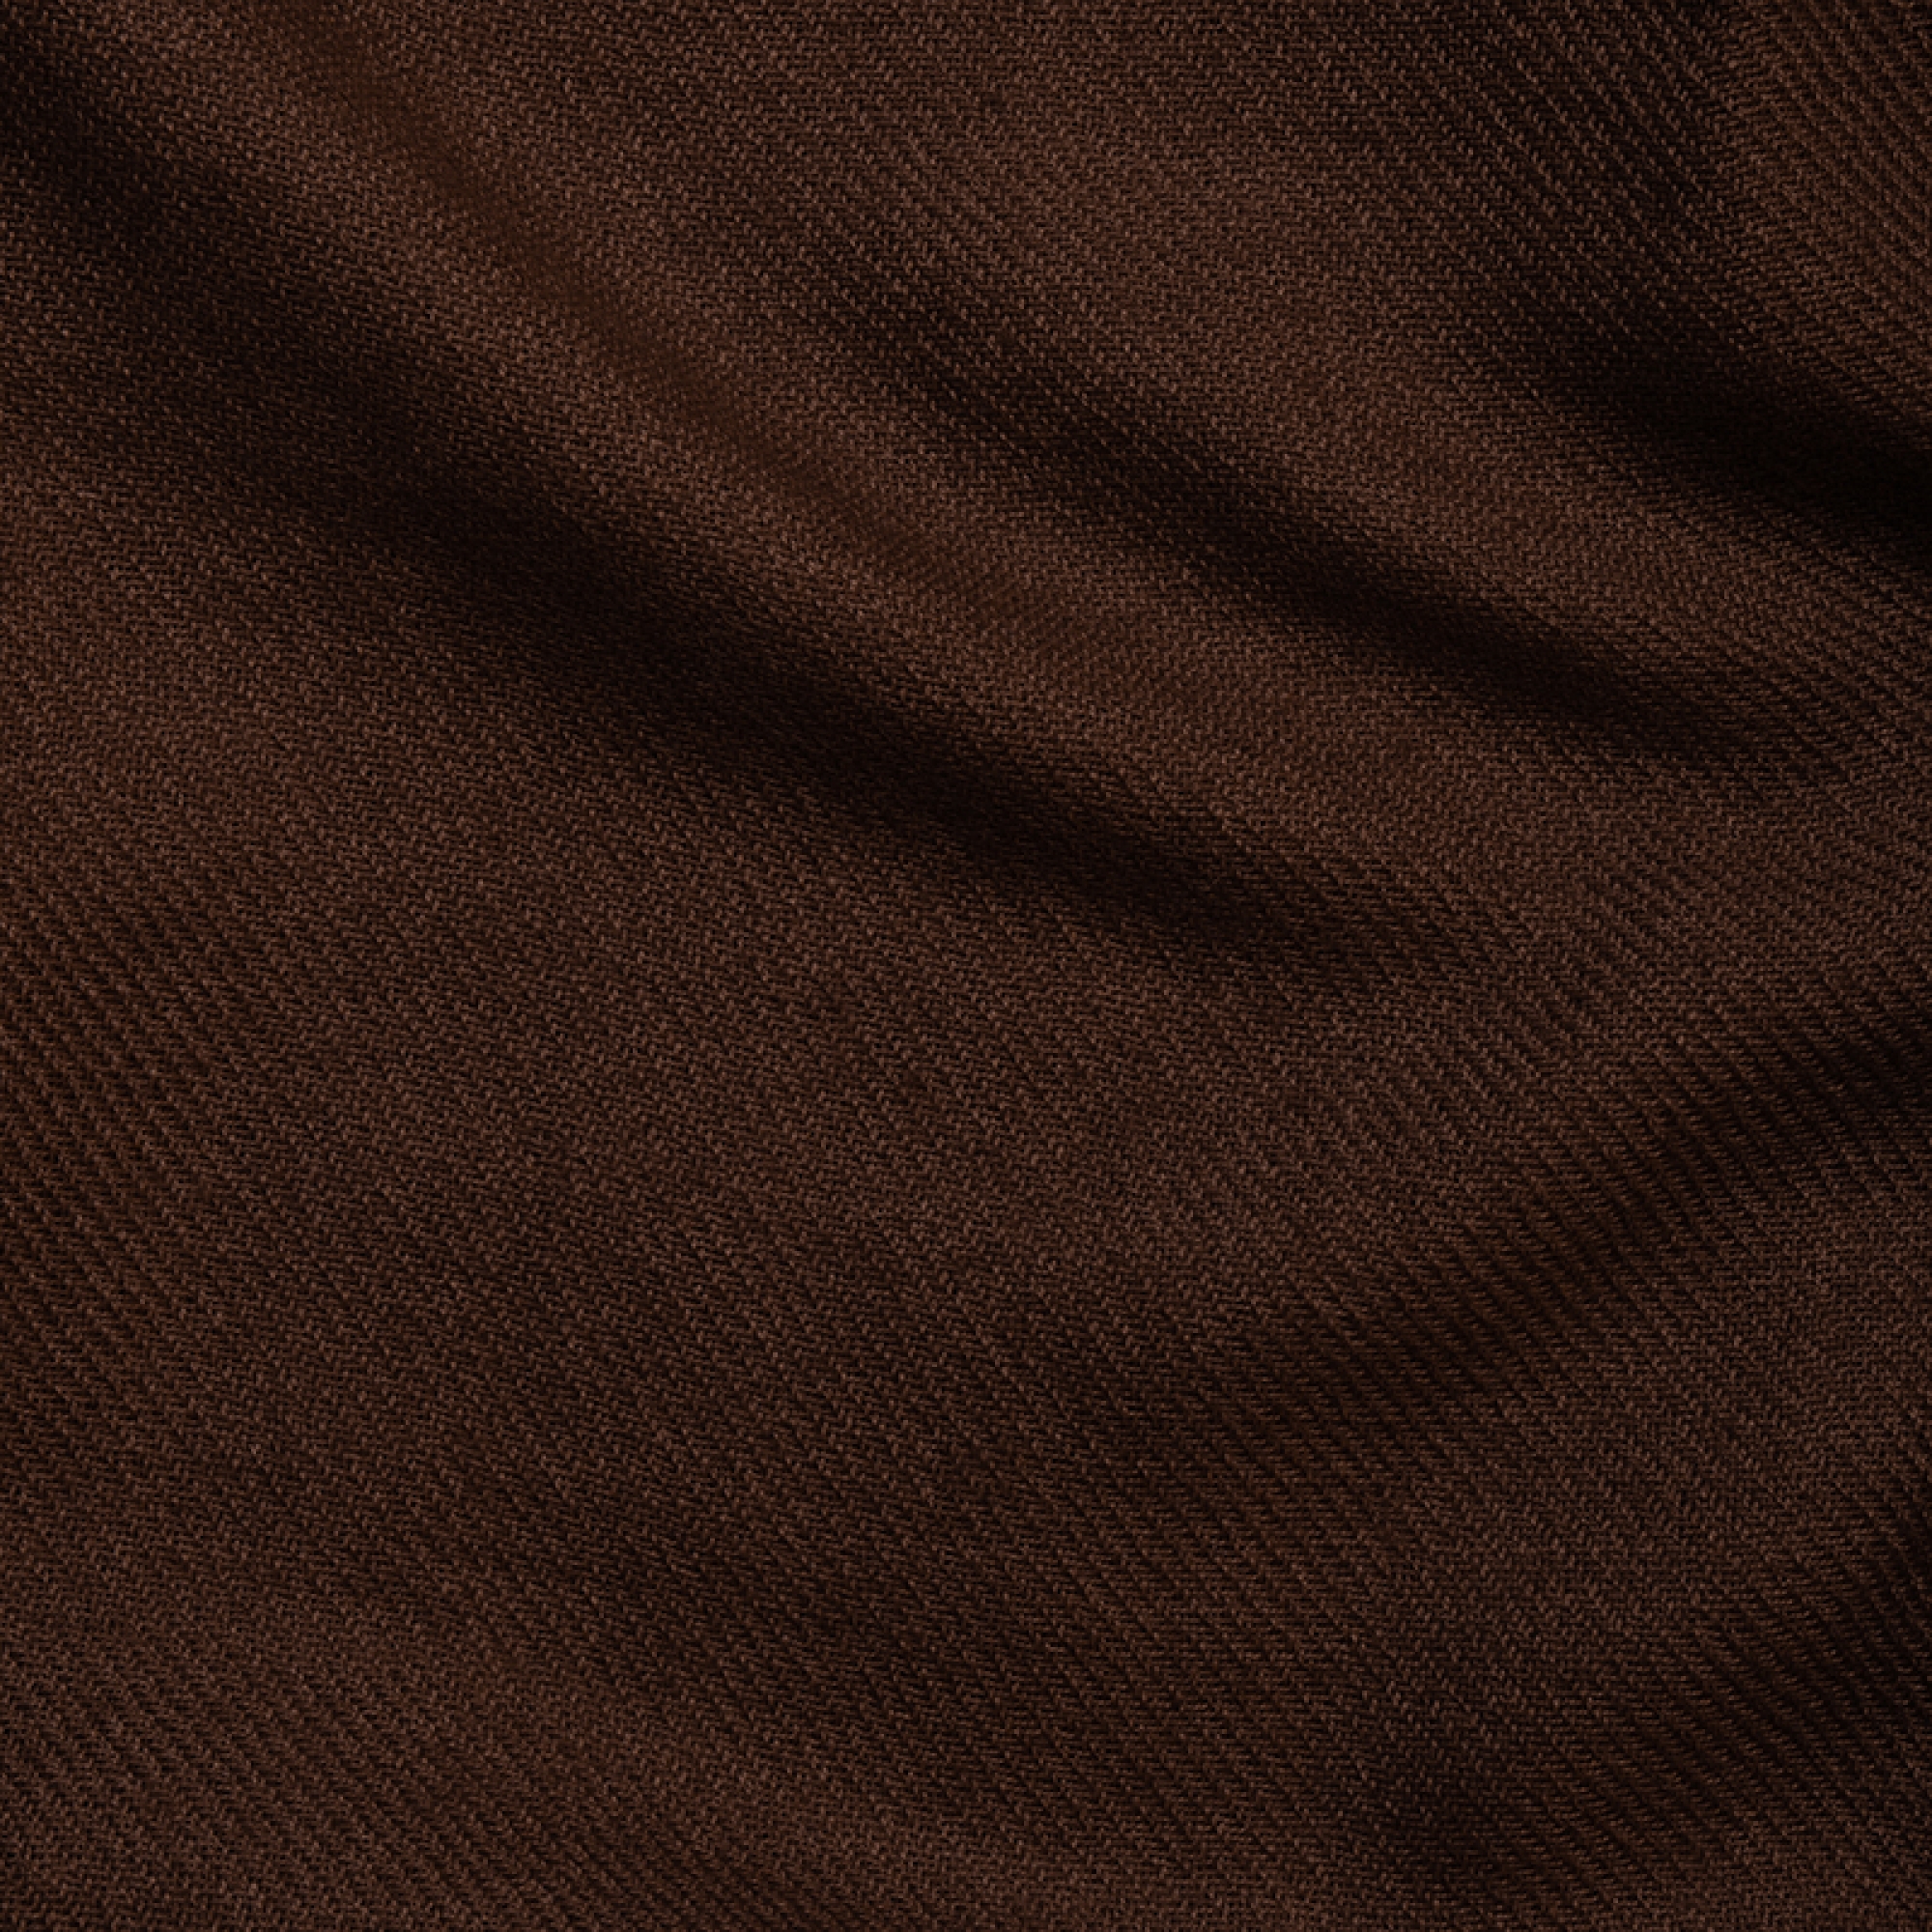 Cashmere accessories cocooning toodoo plain m 180 x 220 cacao 180 x 220 cm